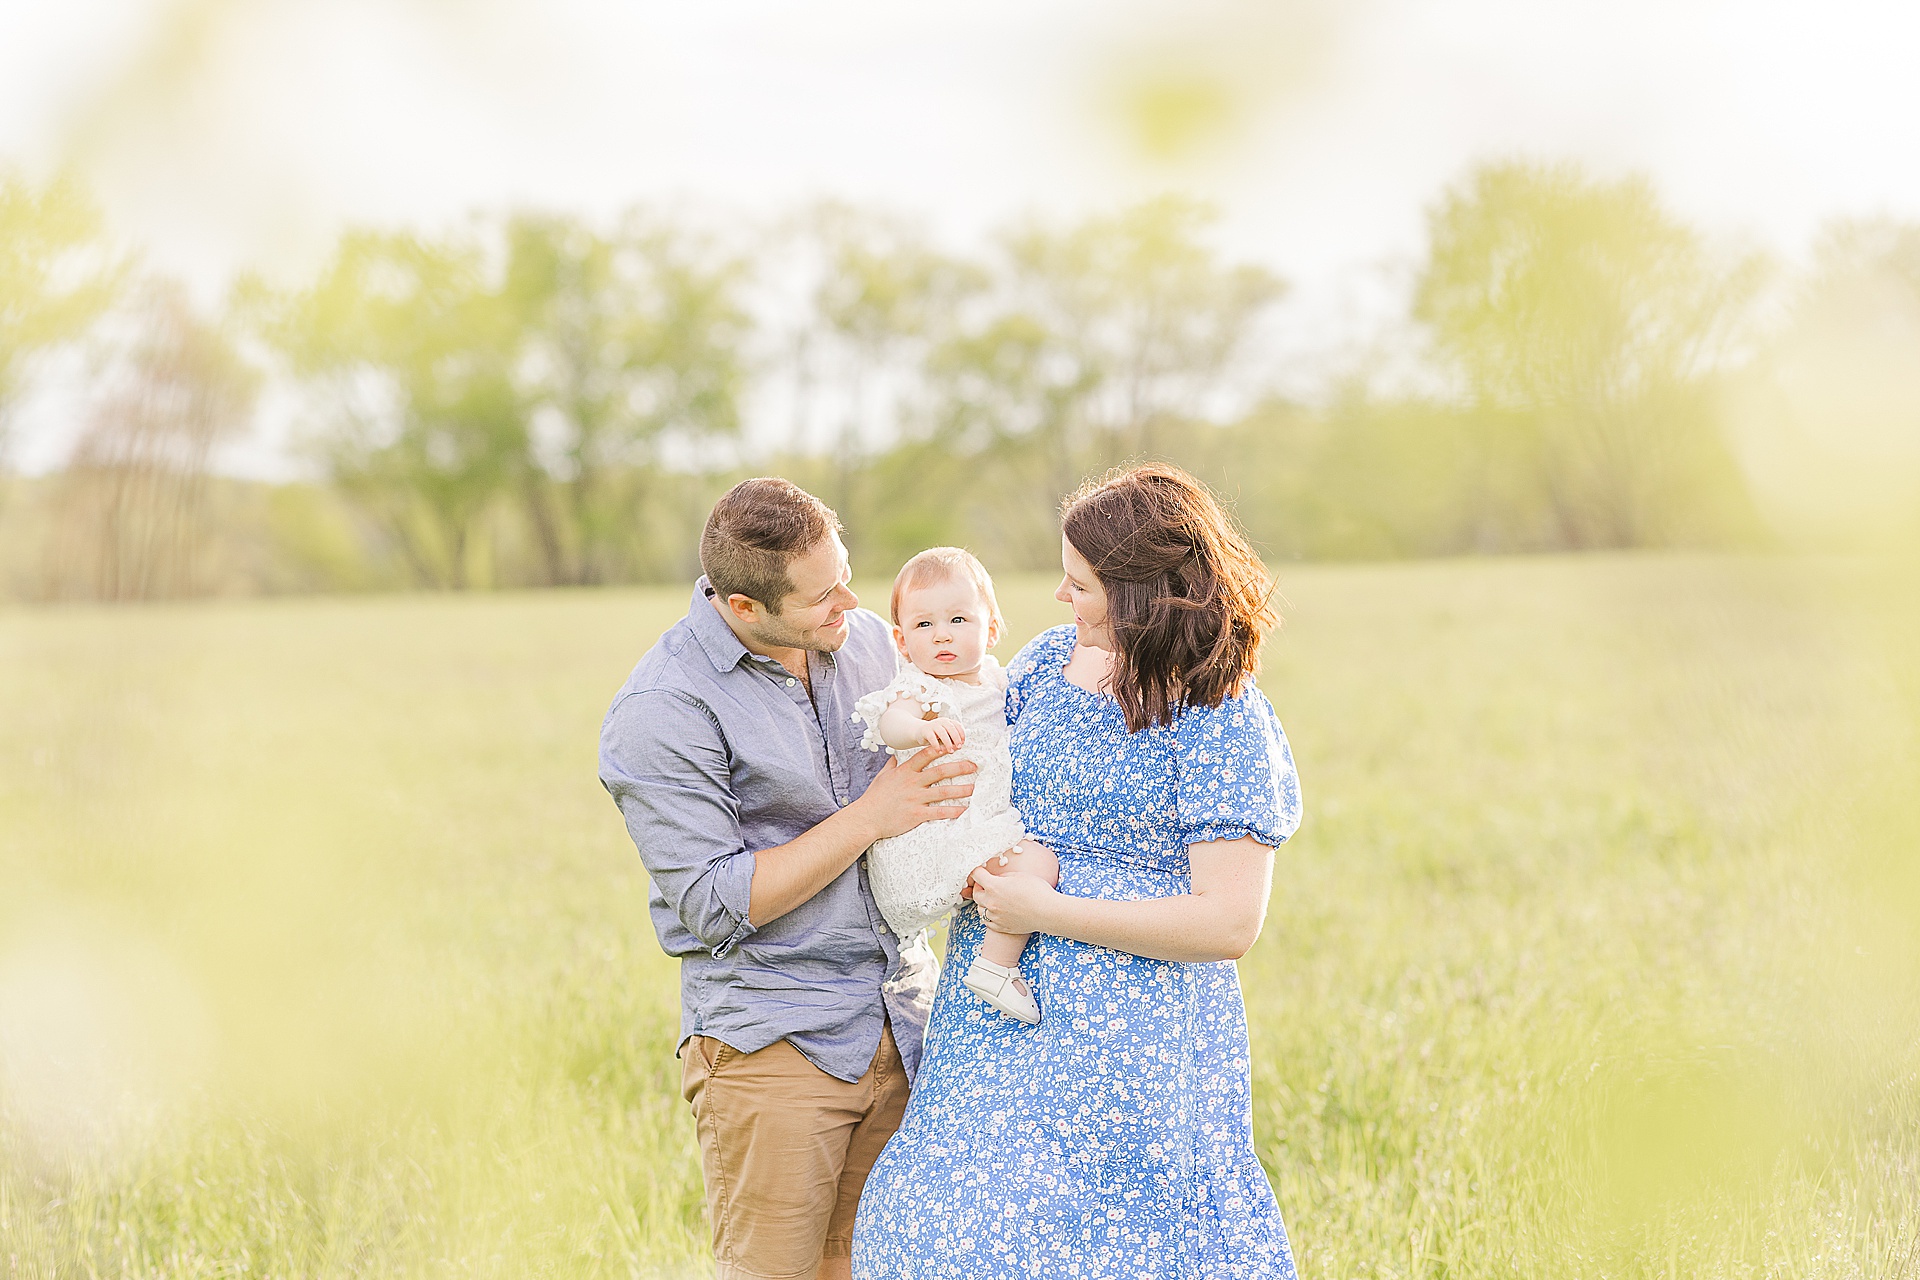 Parents smiles at one year old in field during first birthday family photo session with Sara Sniderman Photography at Heard Farm in Wayland Massachusetts